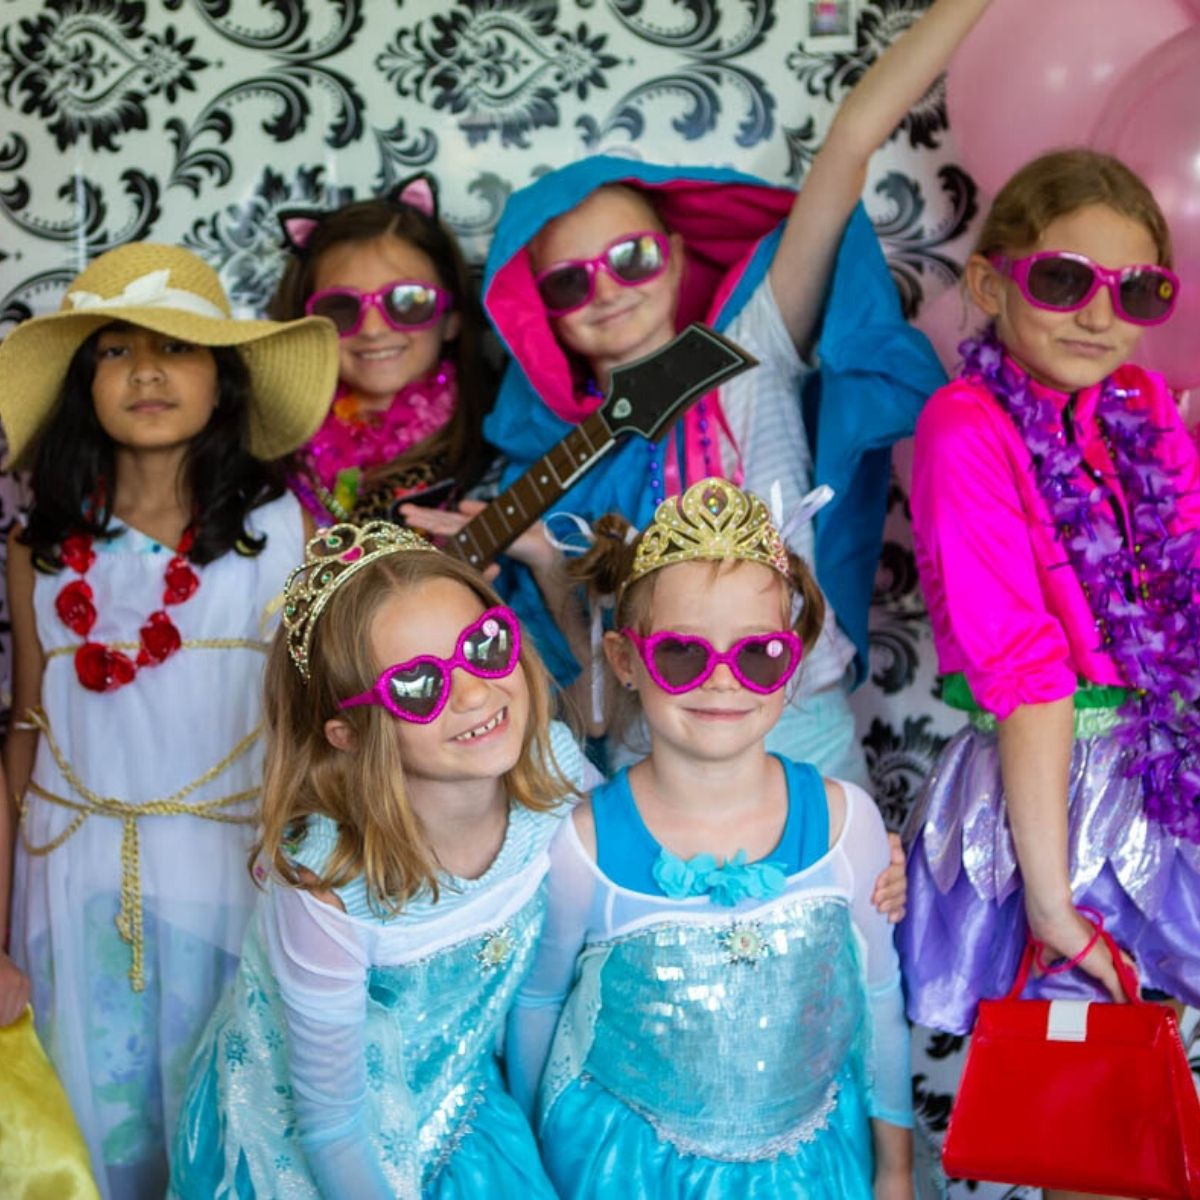 A group of young girls play dress-up at a Barbie birthday party.